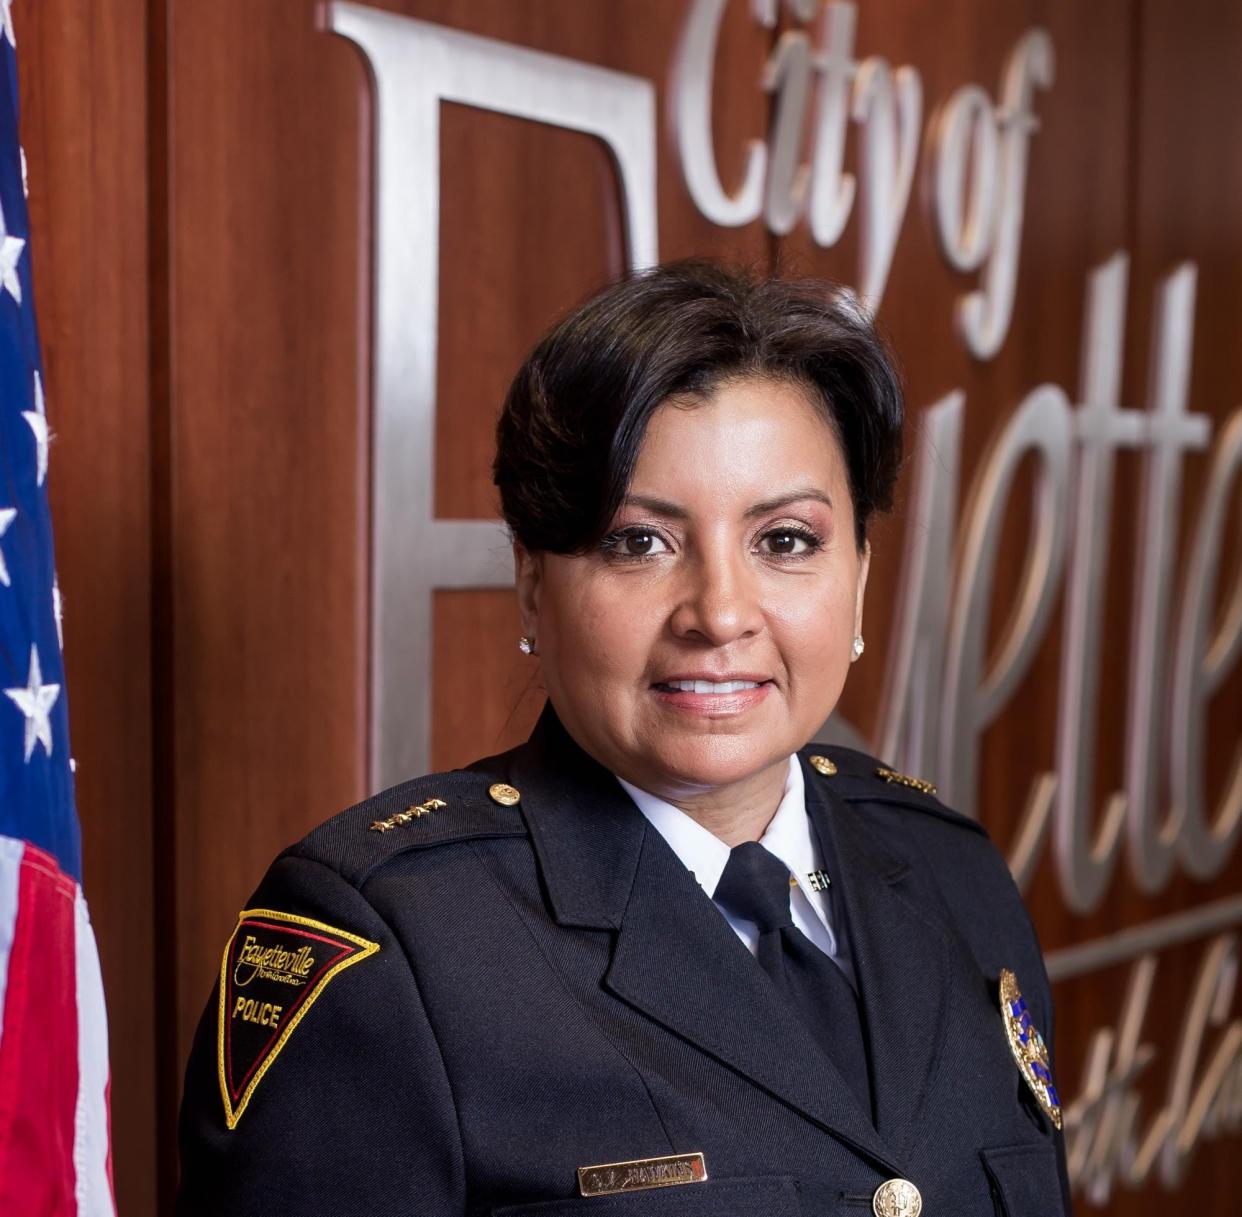 Fayetteville Police Chief Gina Hawkins